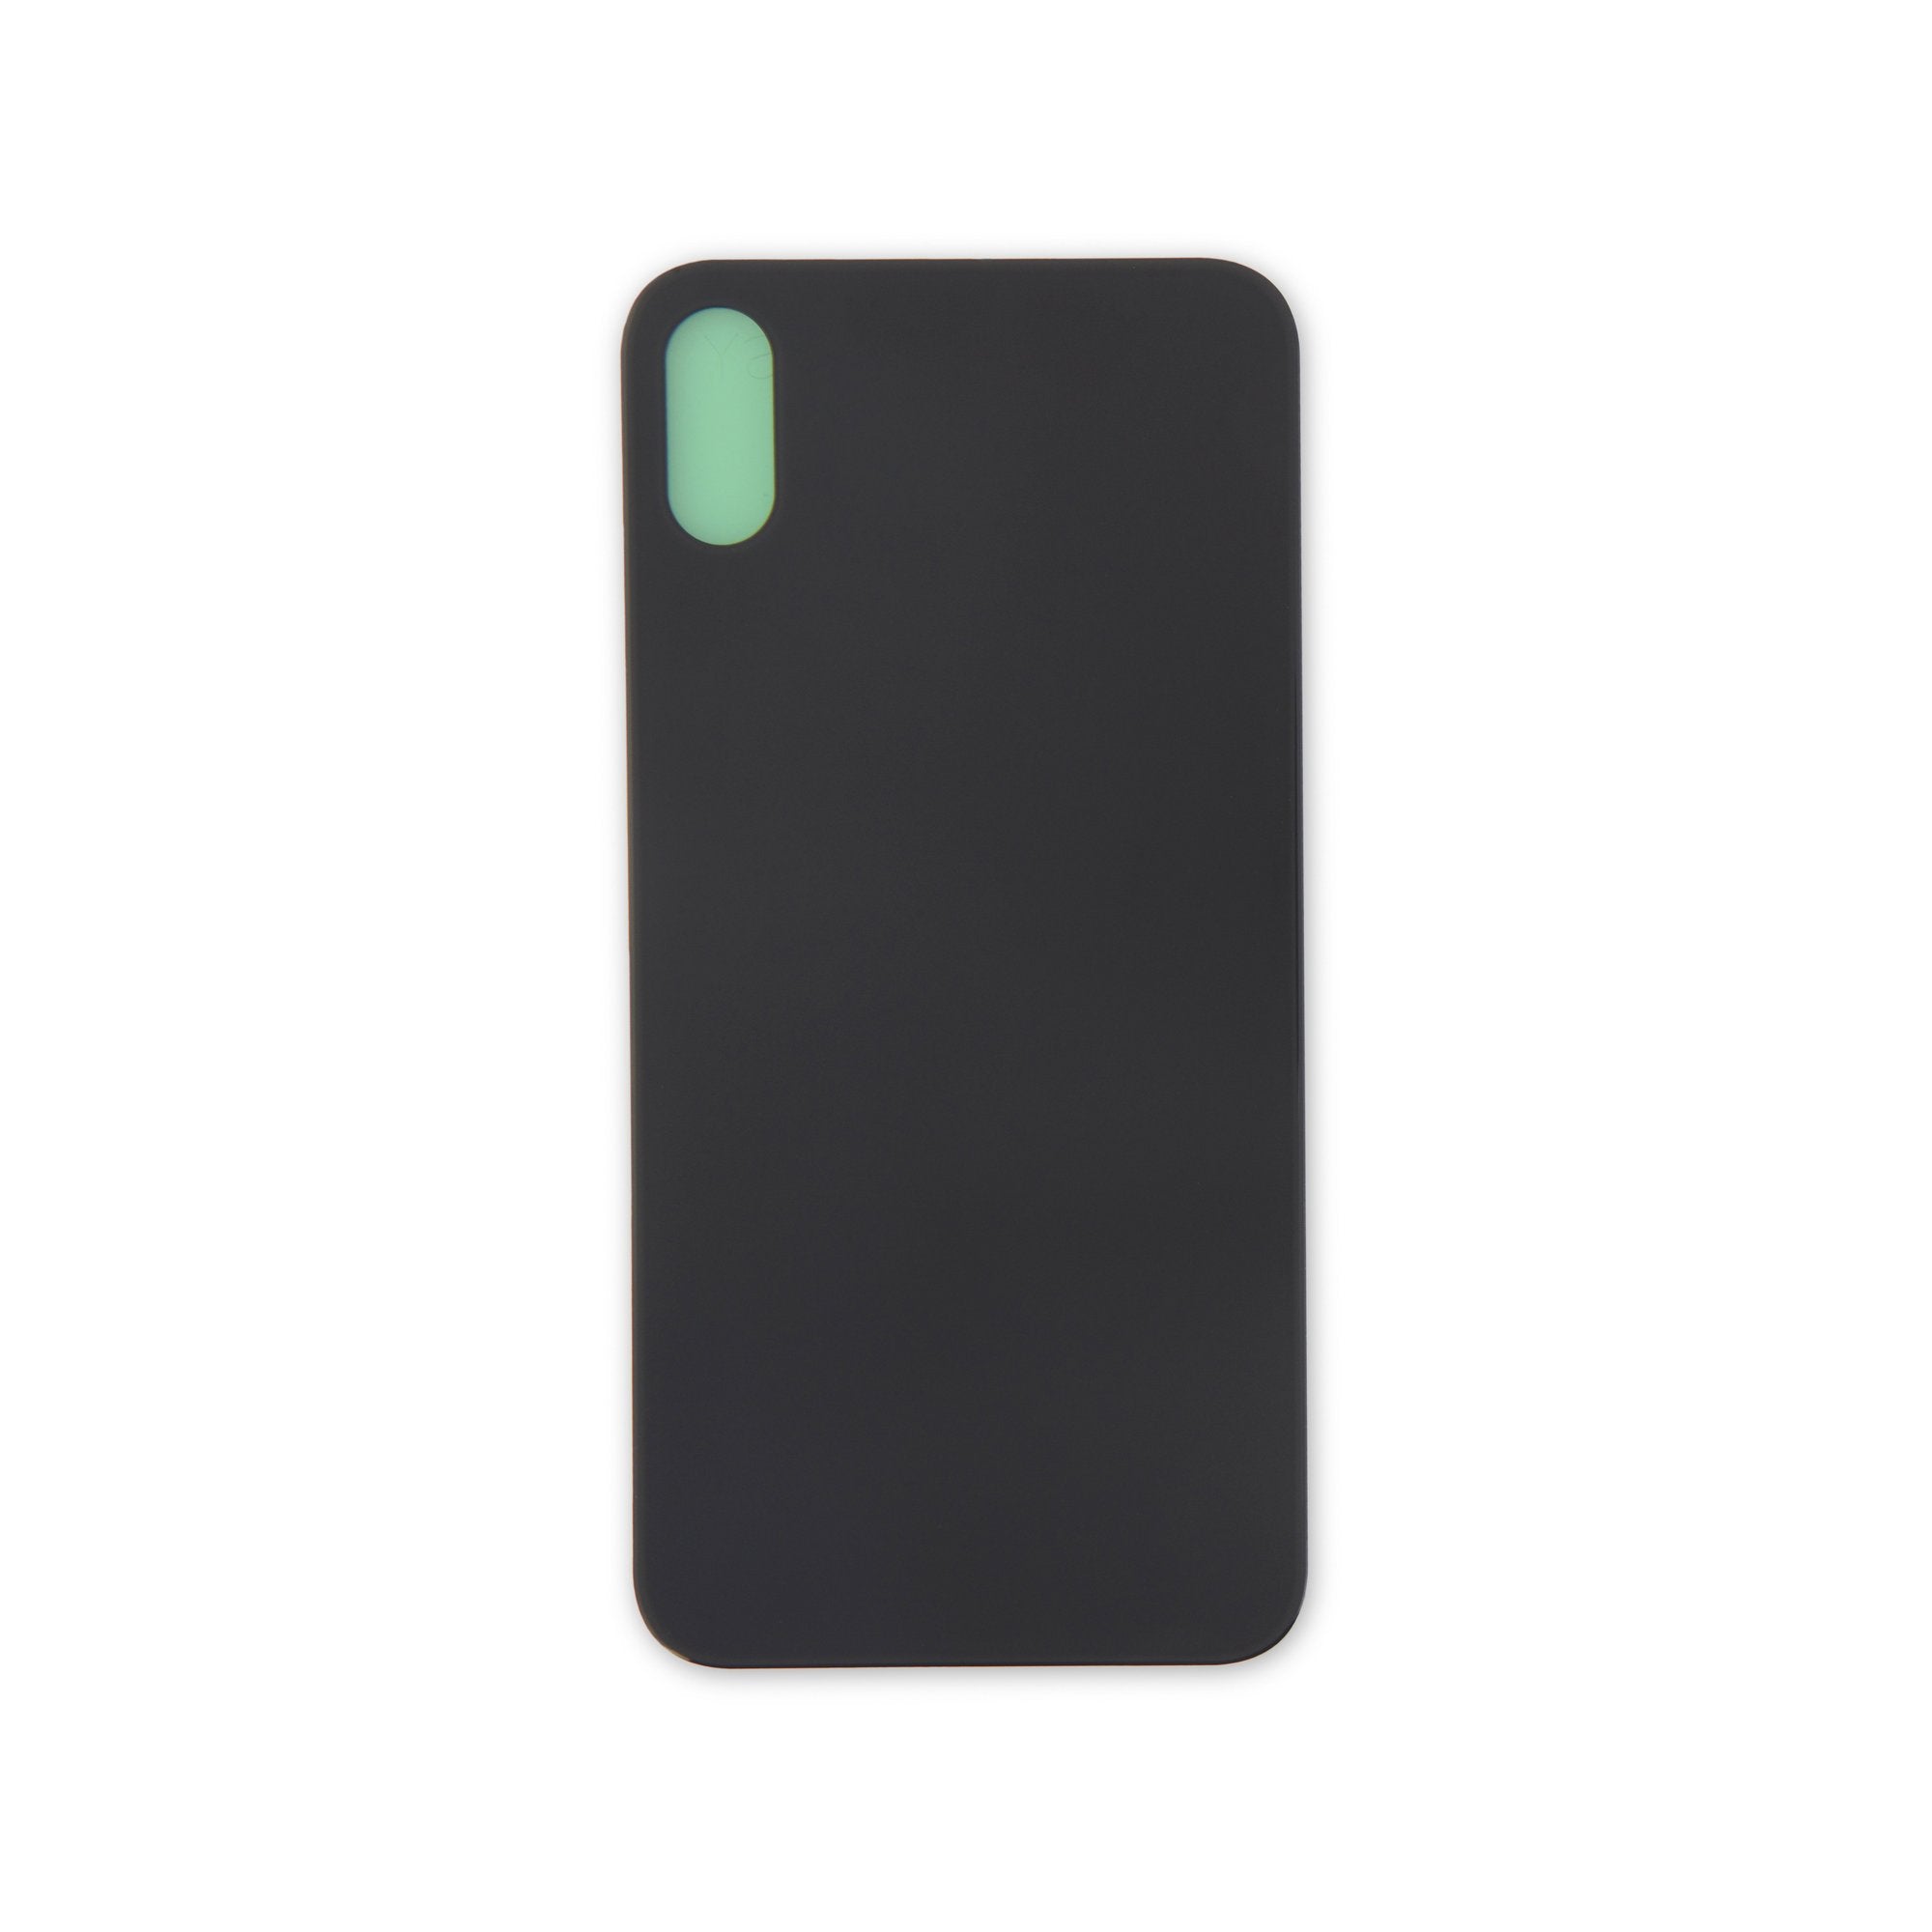 iPhone X Aftermarket Blank Rear Glass Panel Black New